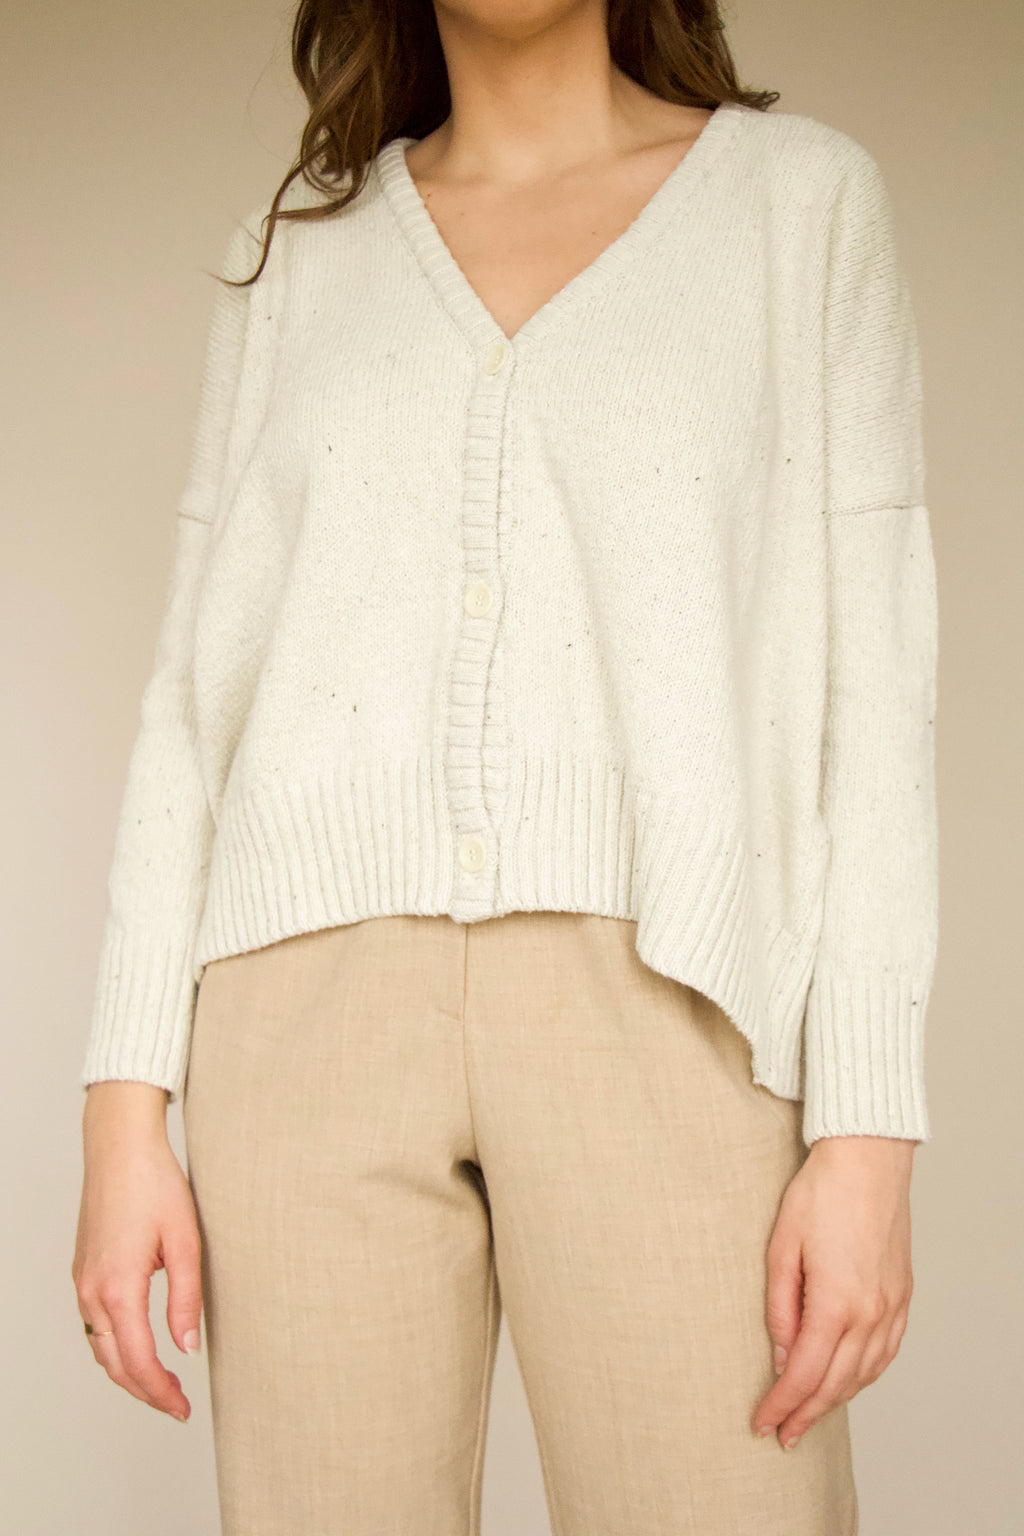 CHARIS - Recycled Cotton Cardigan